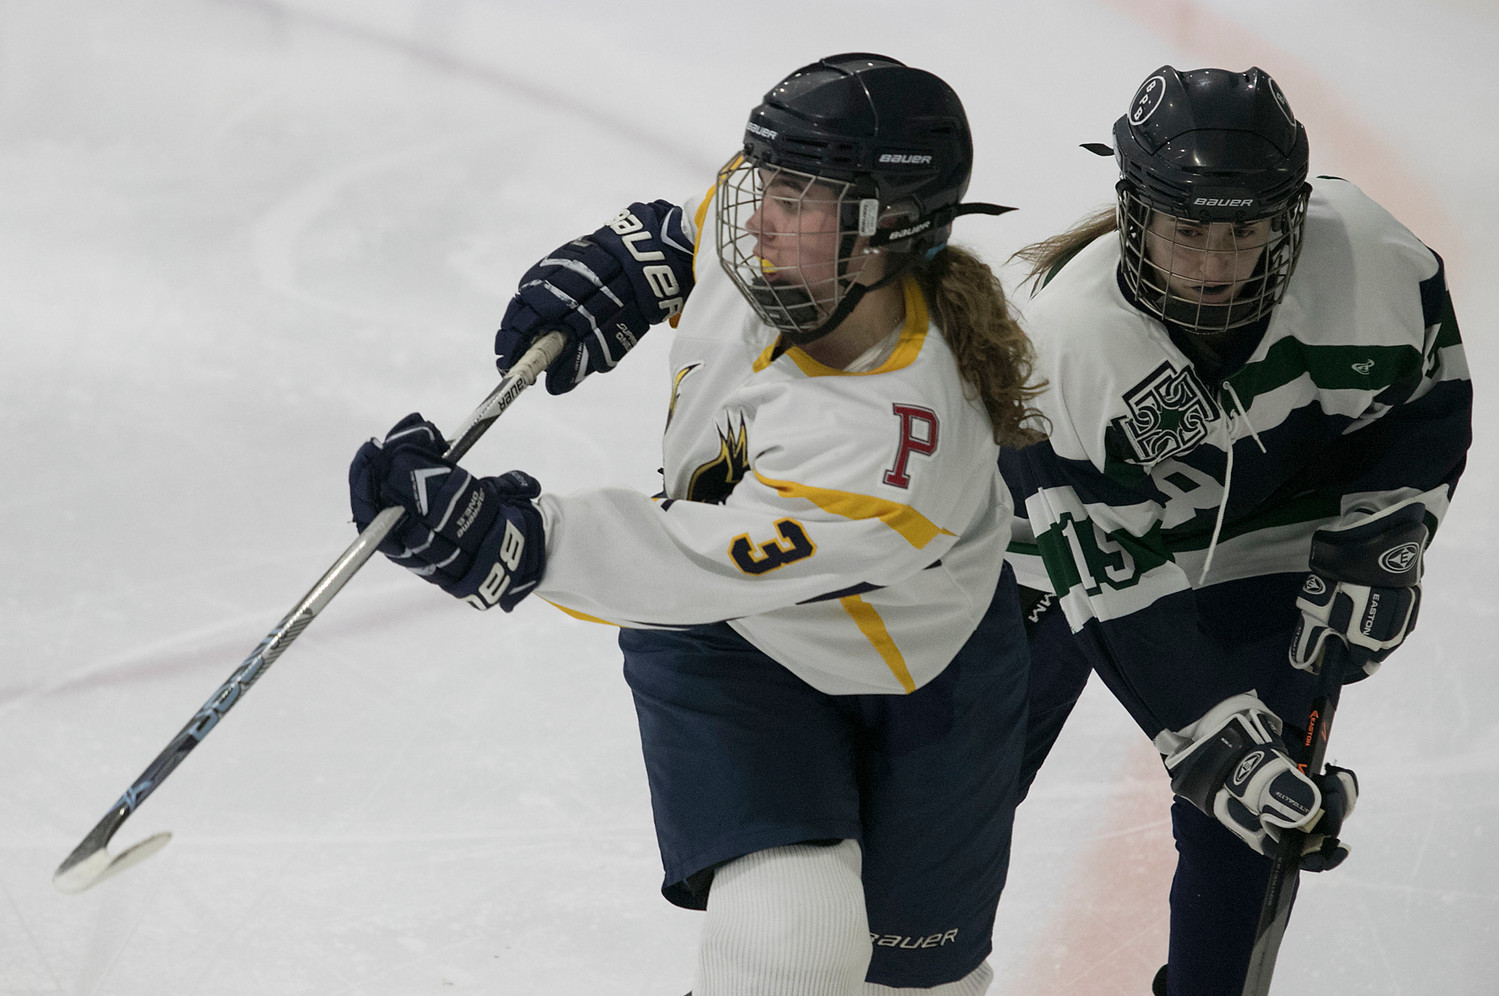 Forward Madison Cornell passes the puck up ice in the third period. She had an assist in the second period on a goal by Madelyn Cox.